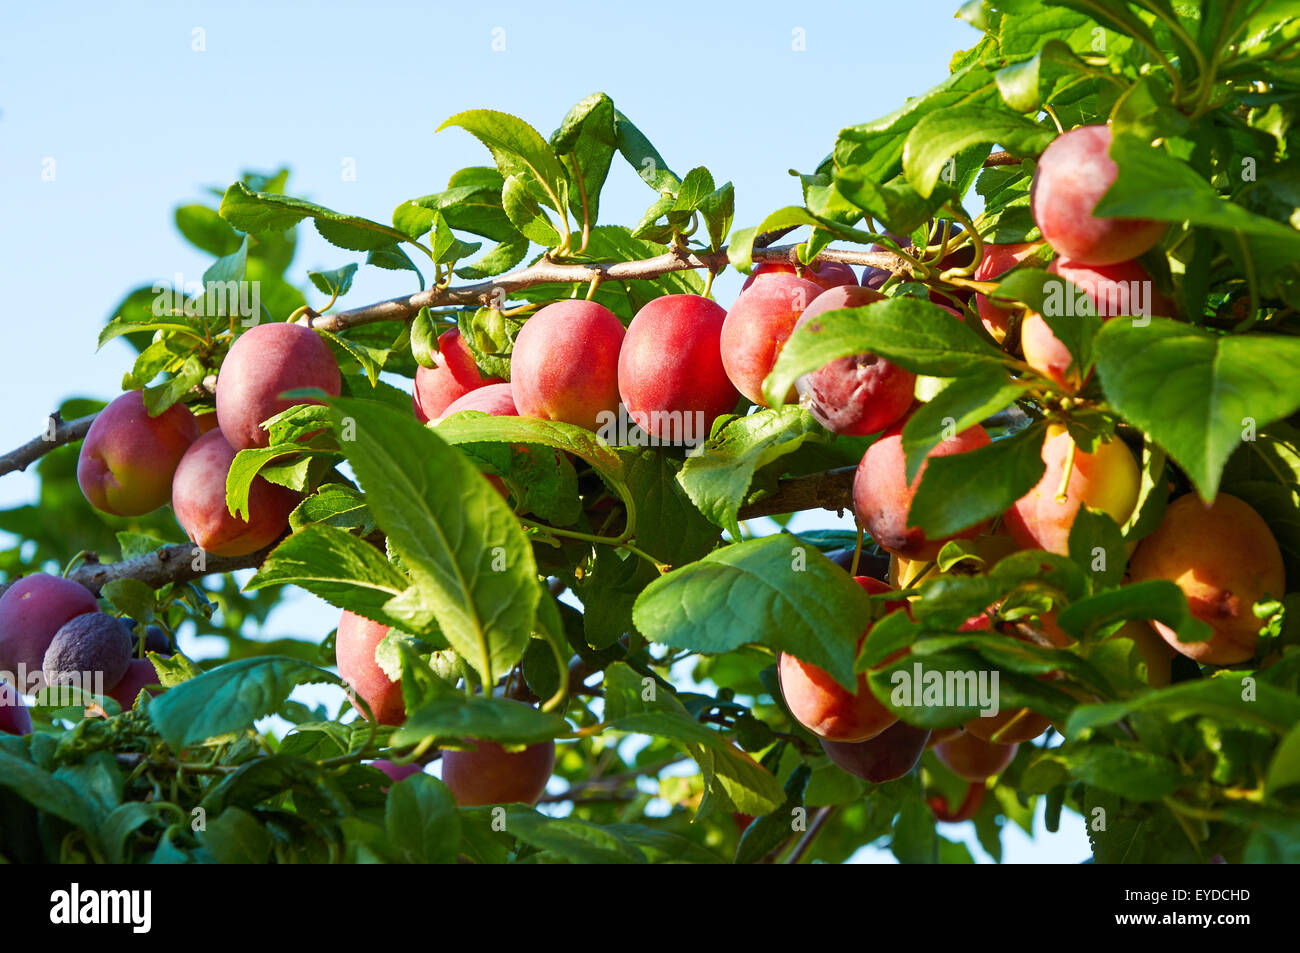 Branch of plum tree with many ripening fruits Stock Photo